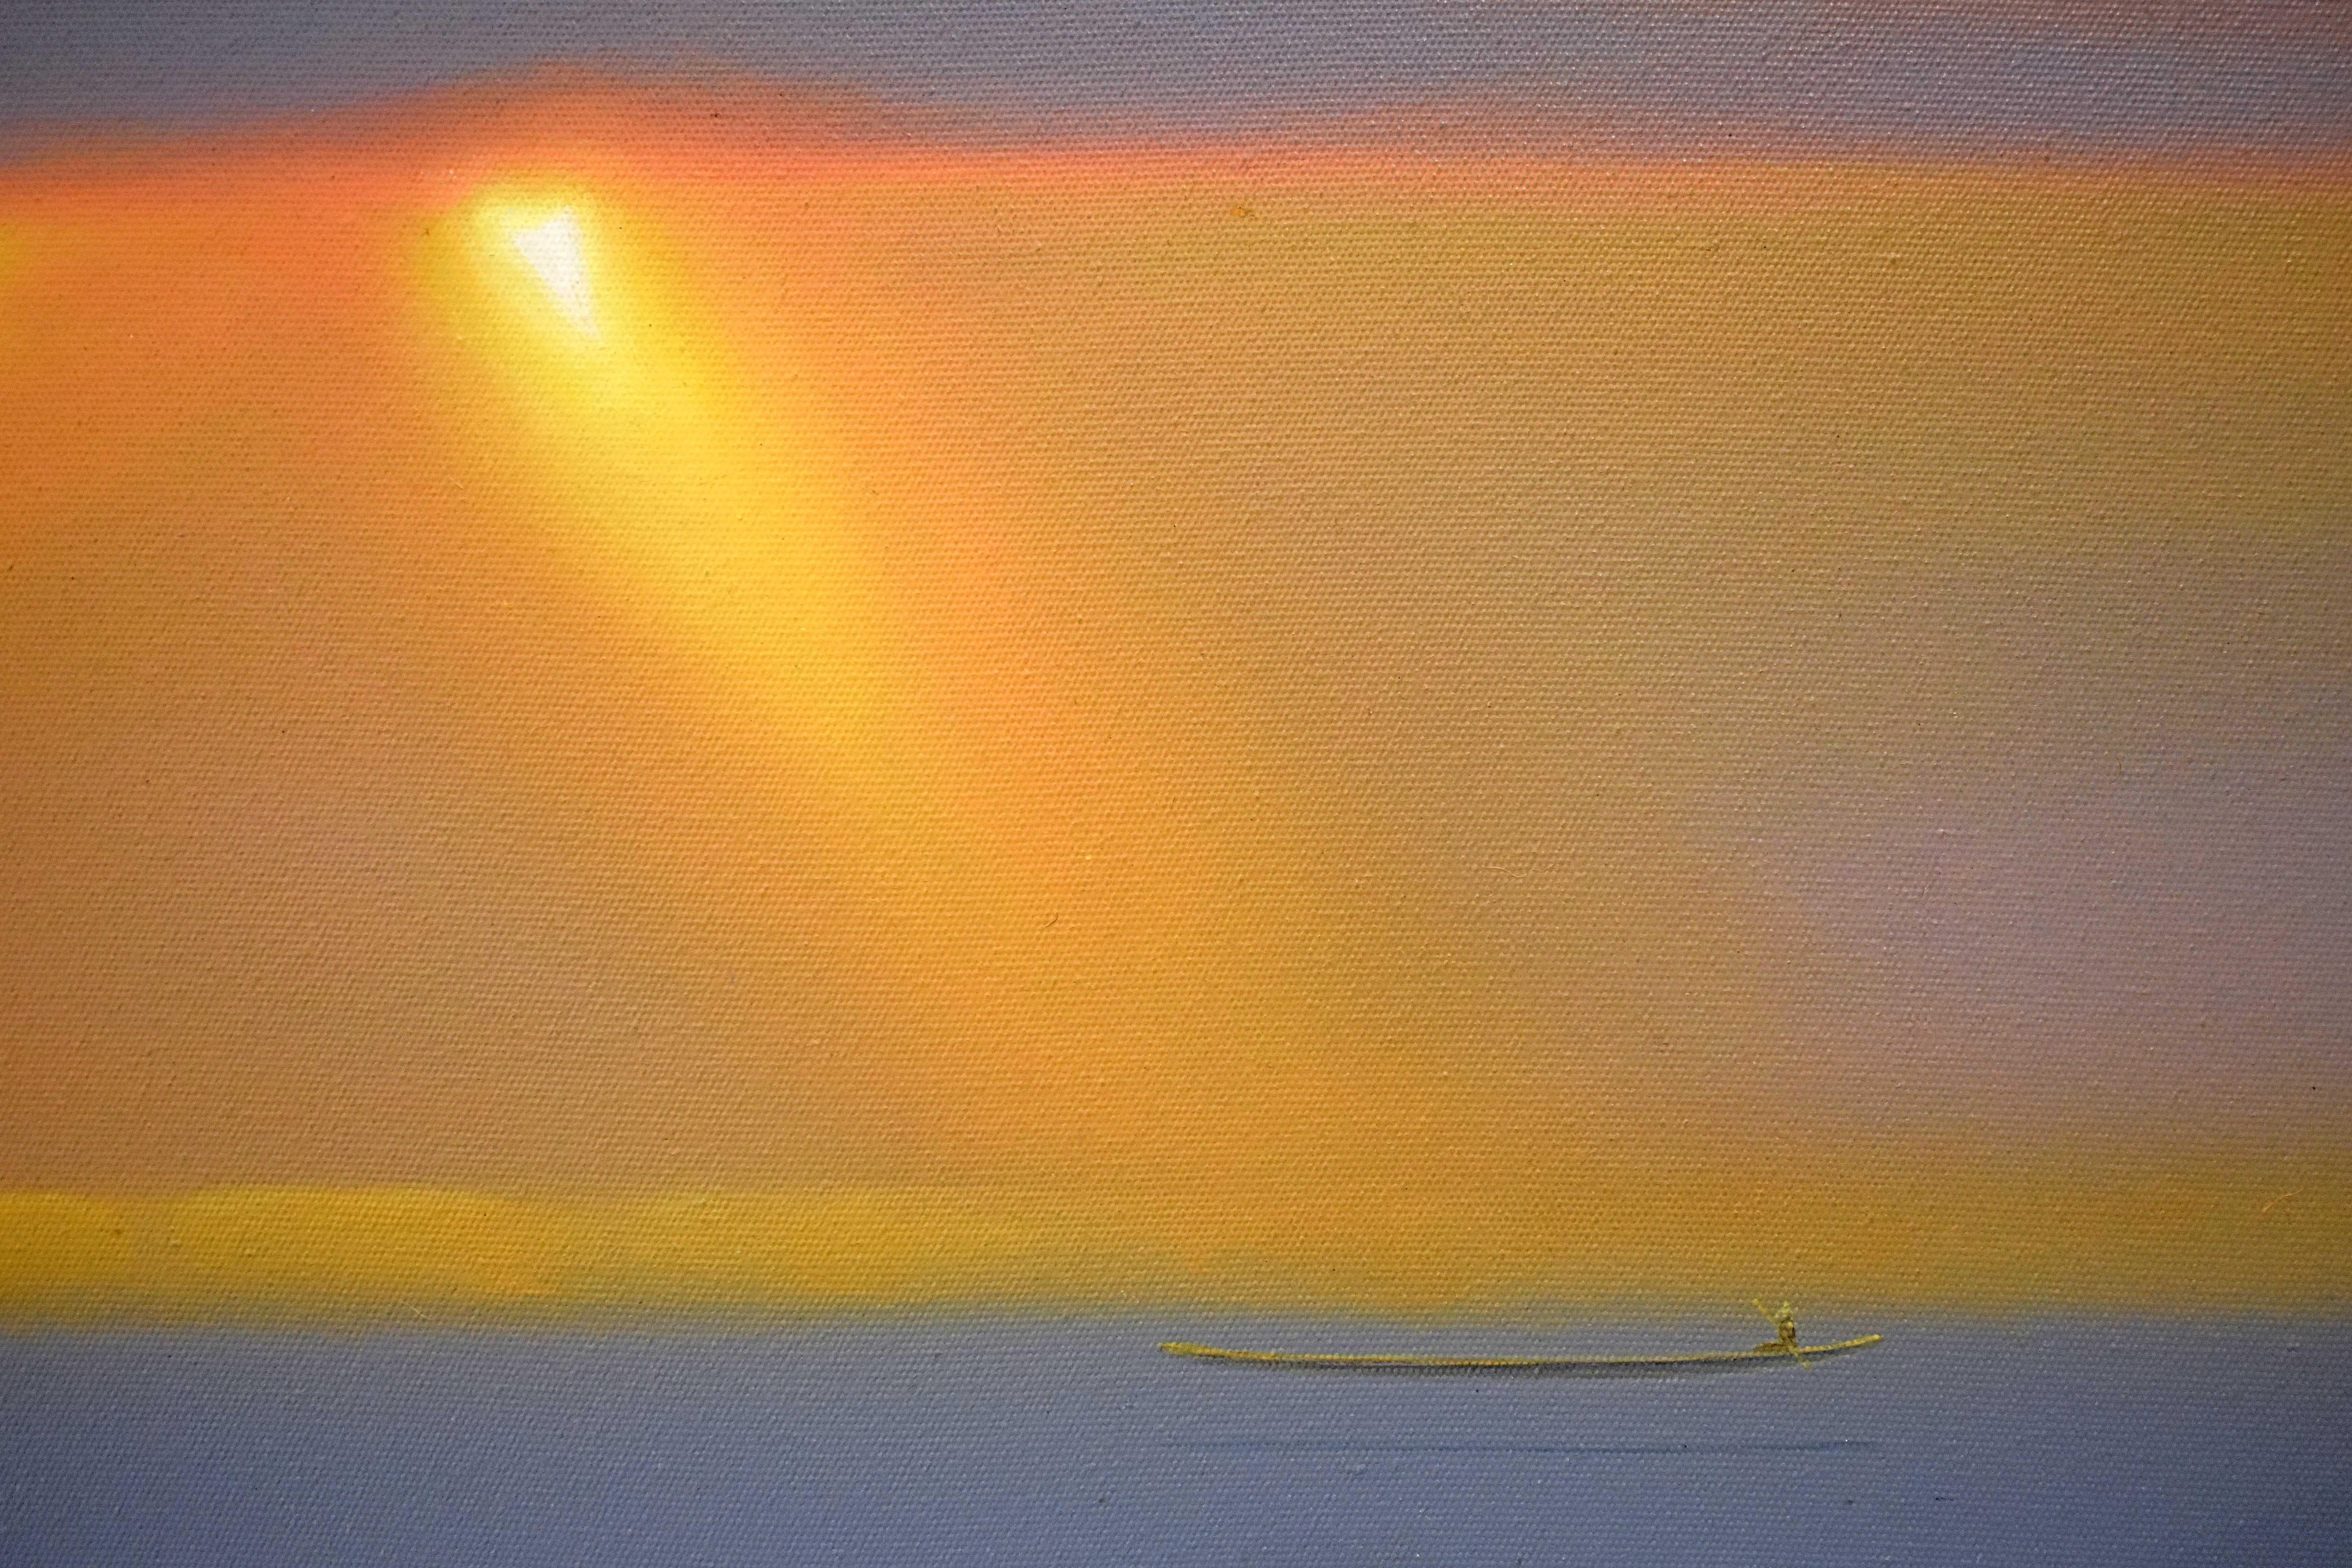 Dreamscape V32. Landscape Painting. Sunset. Minimalism. Boat on water. Sea. Sky 3